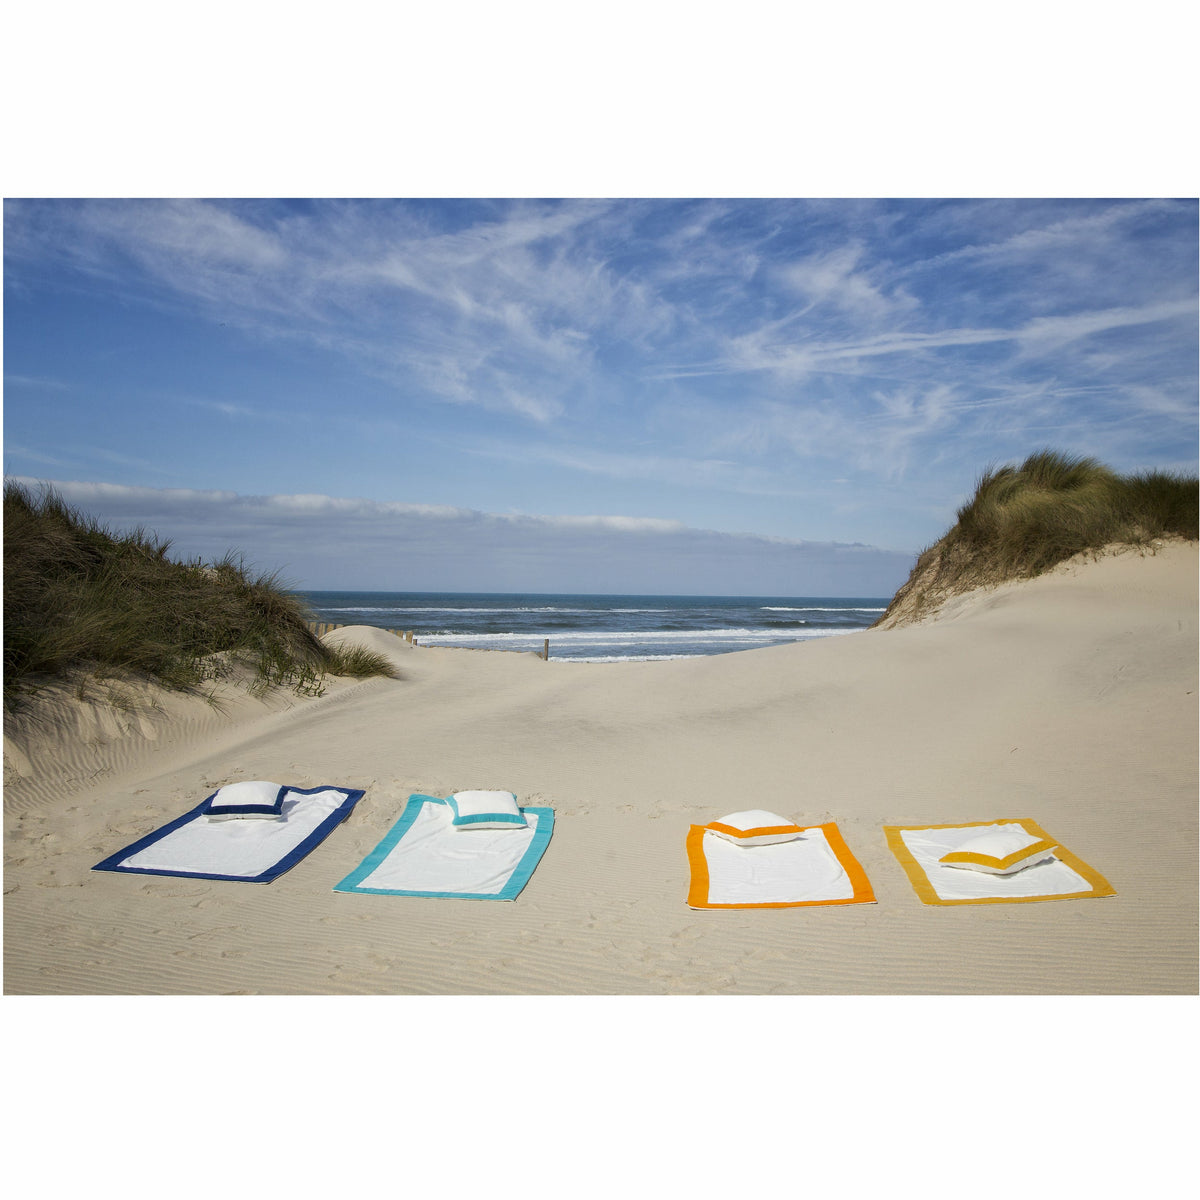 Abyss Portofino Beach Towels and Pillows Lifestyle Fine Linens